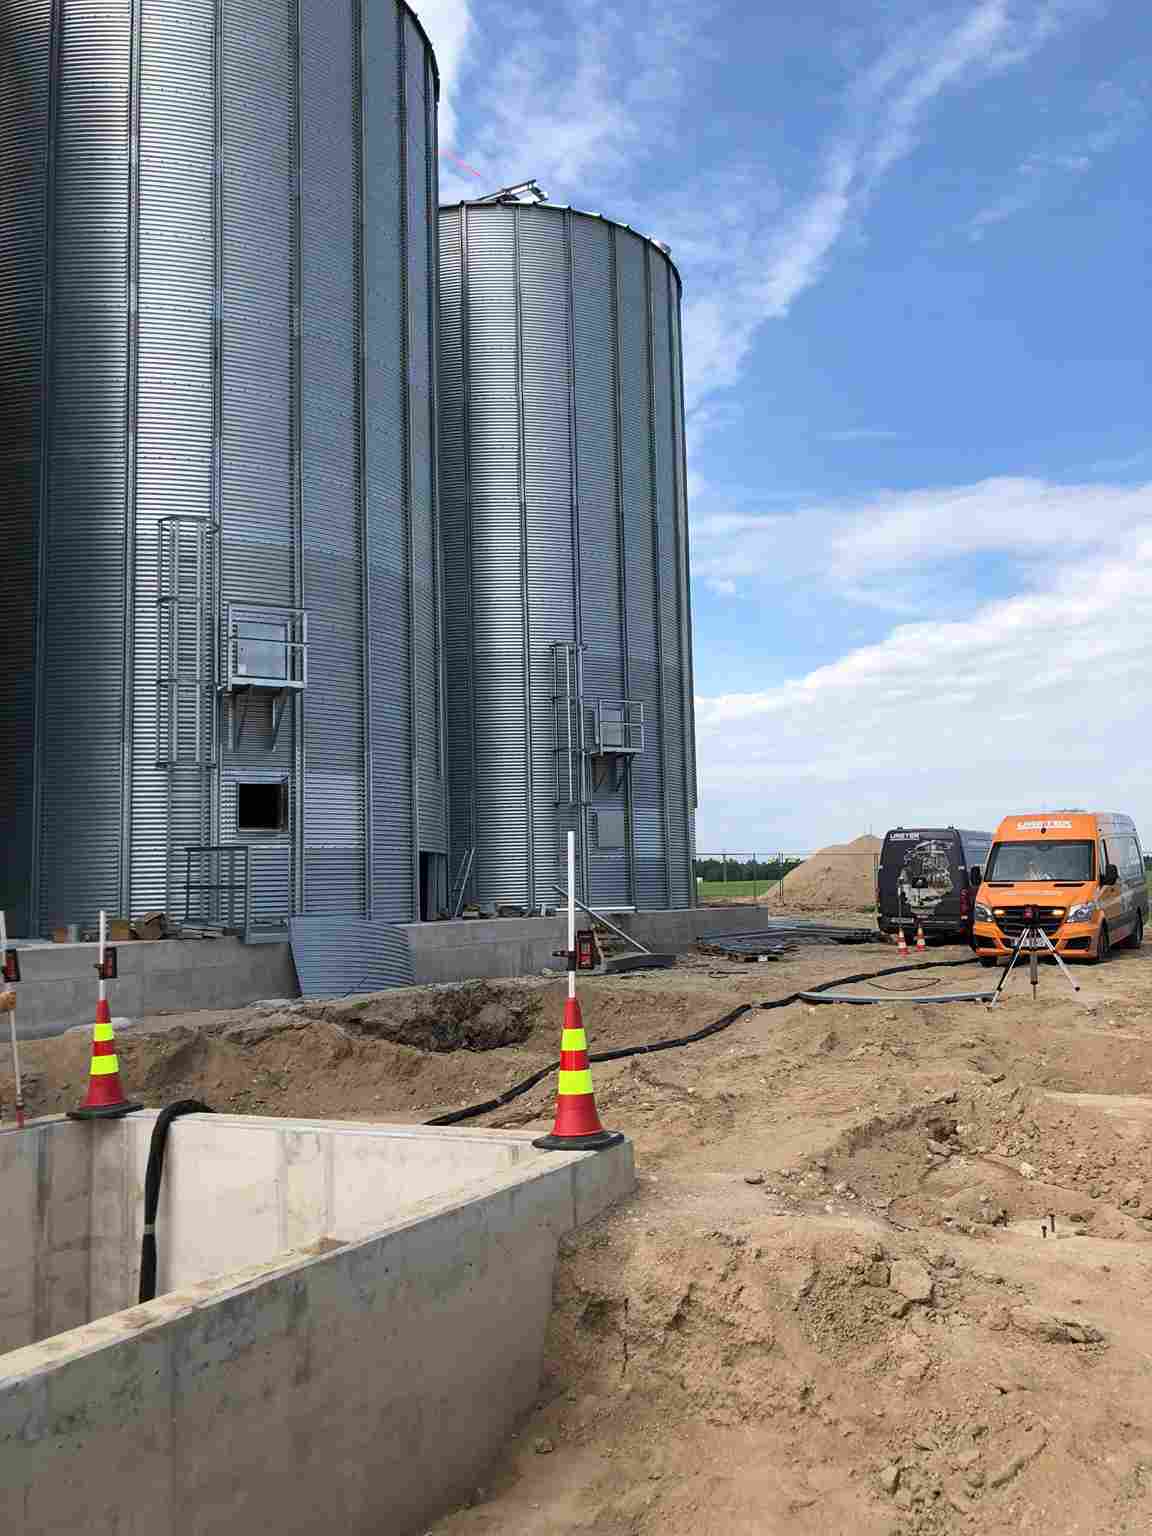 Lifting of concrete slabs and soil compaction at Vao Agro silo storage